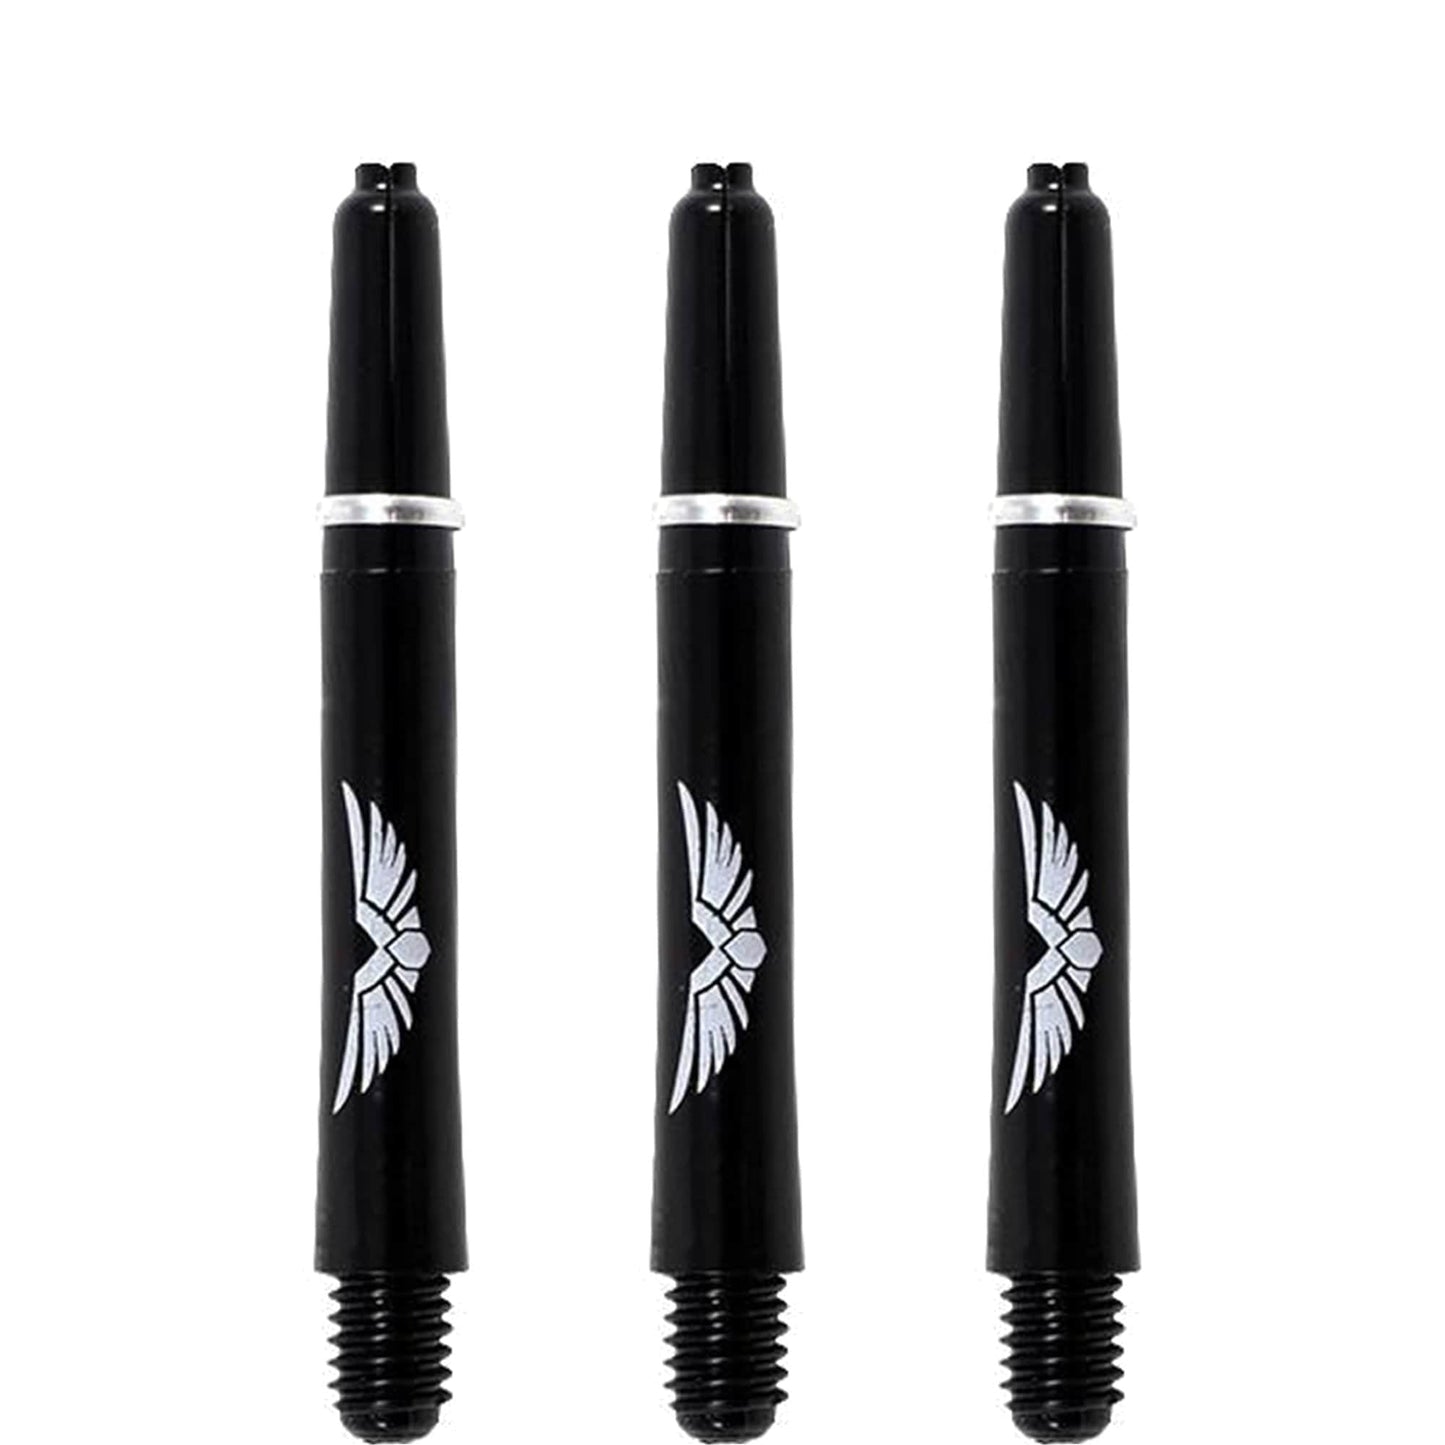 Shot Eagle Claw Dart Shafts - with Machined Rings - Strong Polycarbonate Stems - Black Tweenie